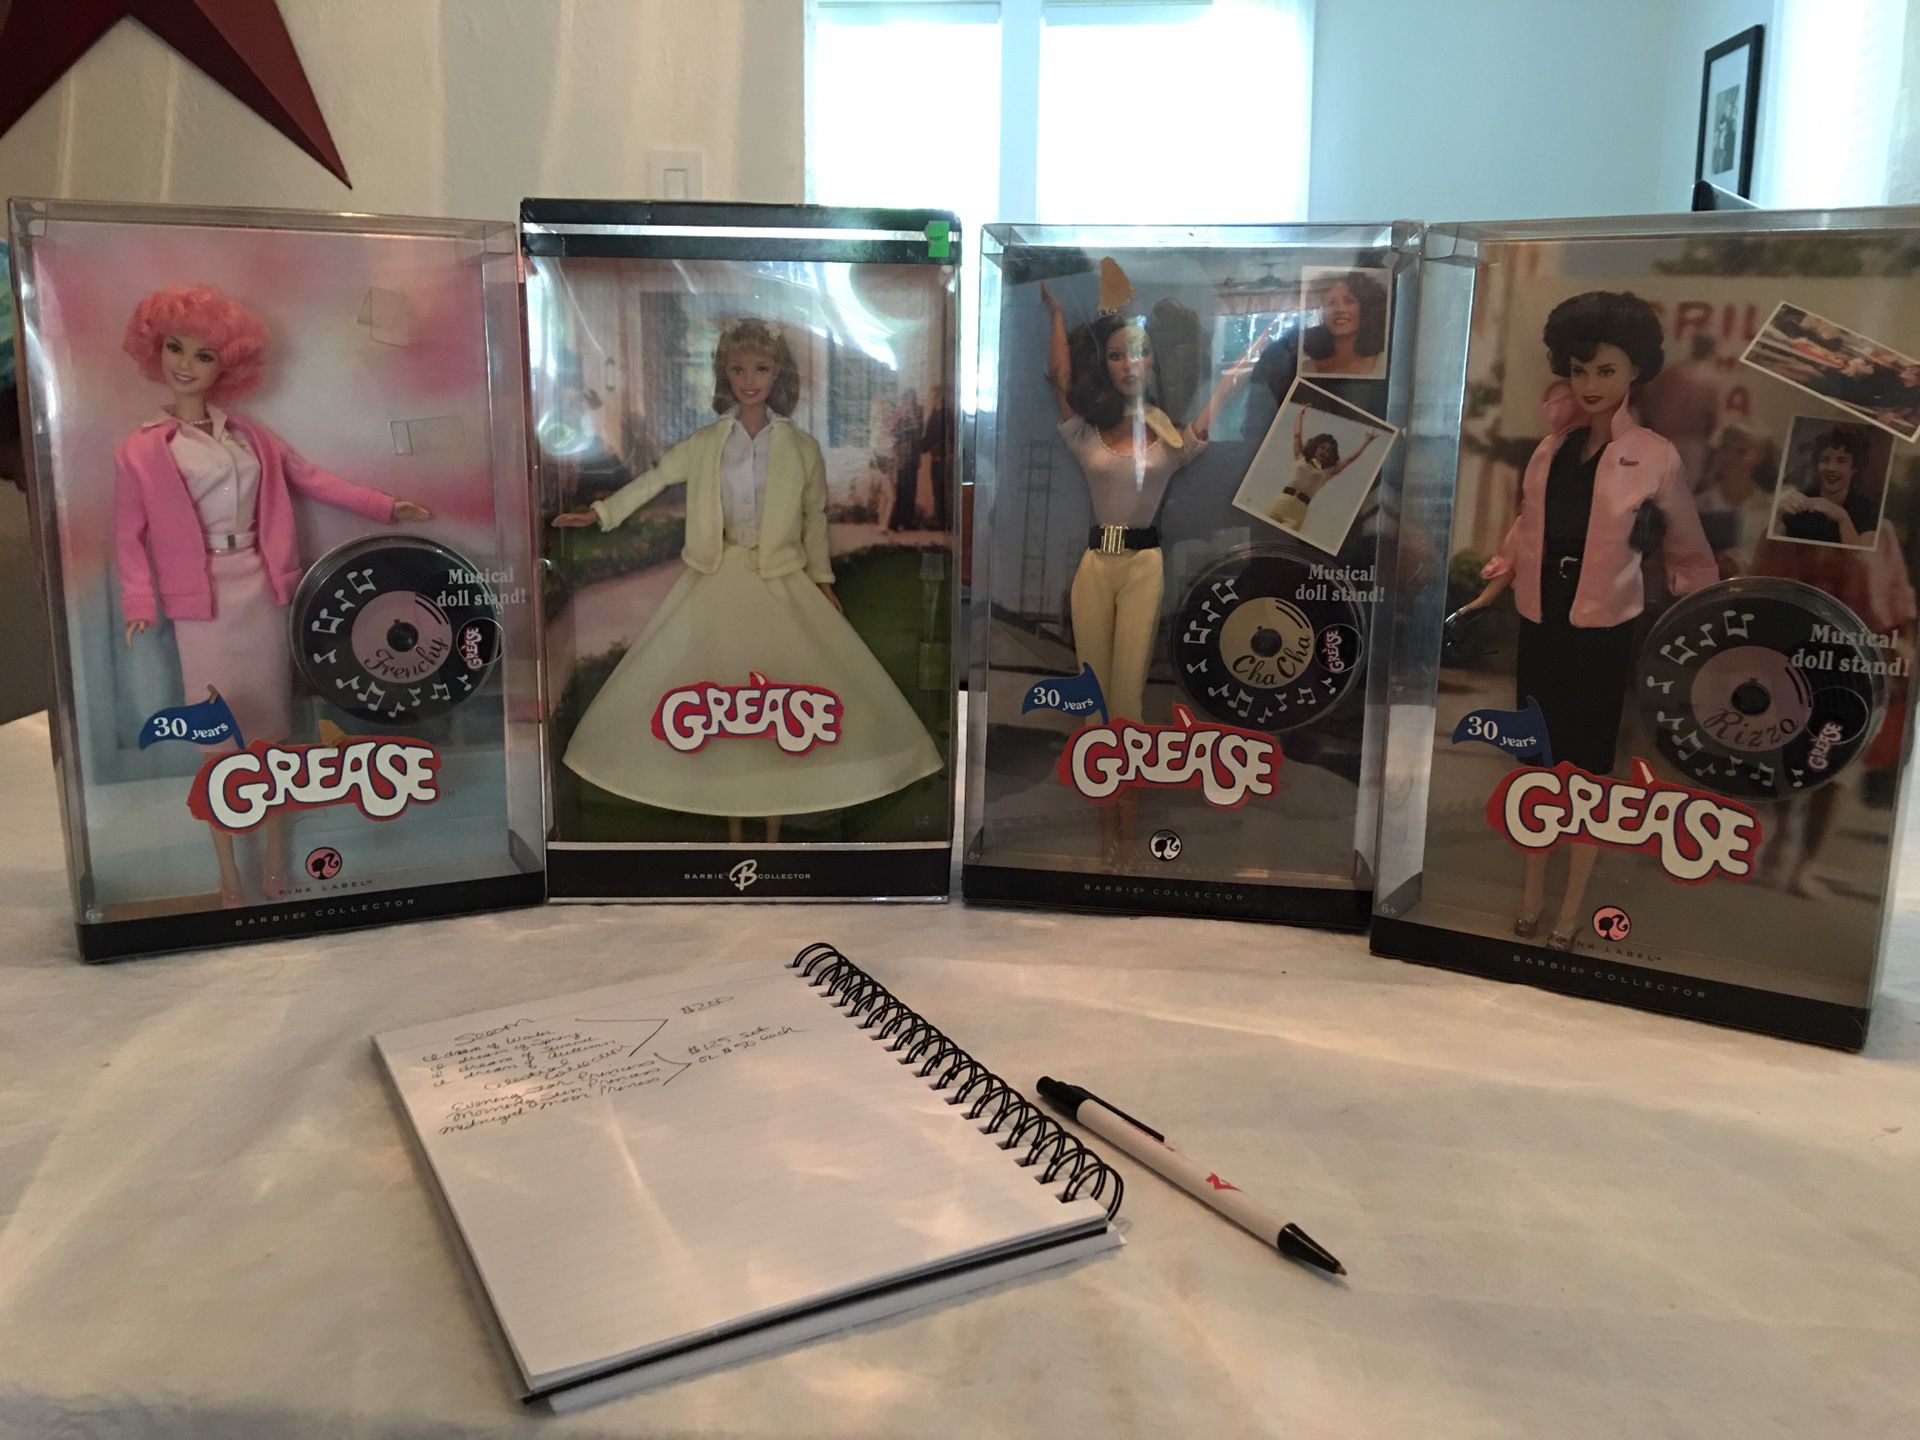 Grease action figures